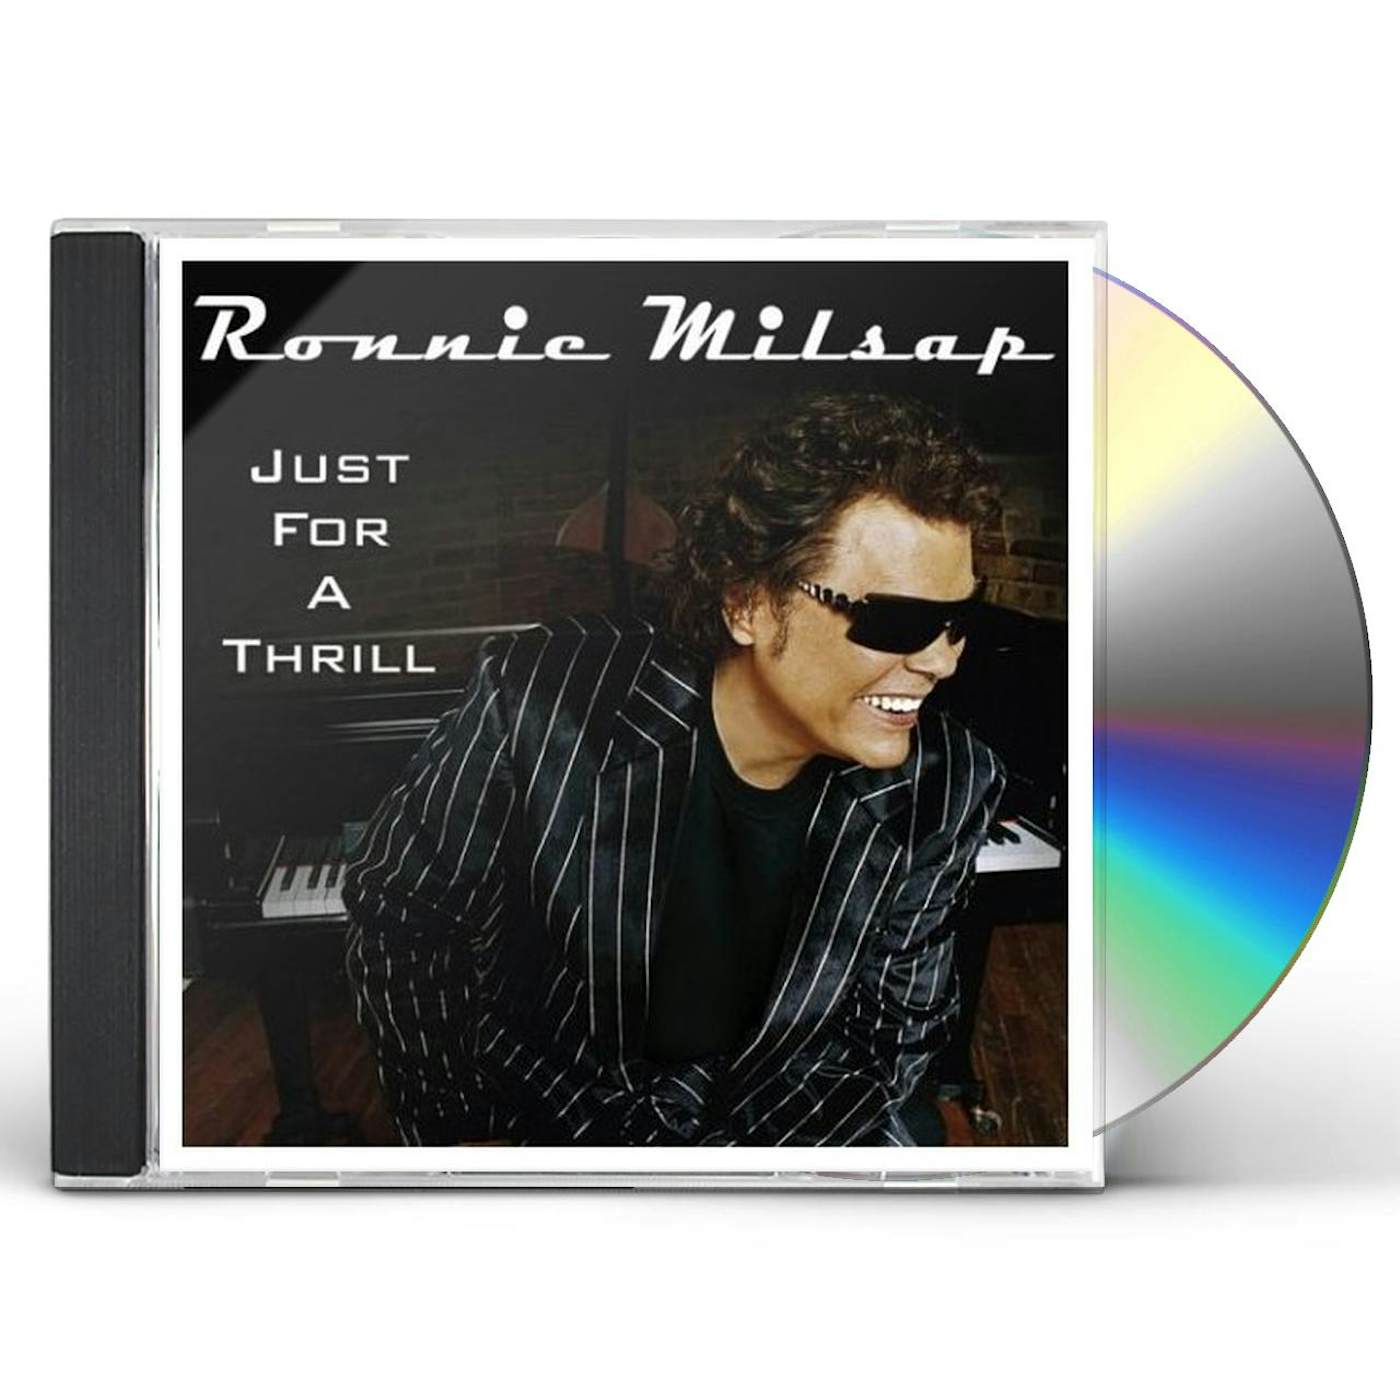 Ronnie Milsap JUST FOR A THRILL CD